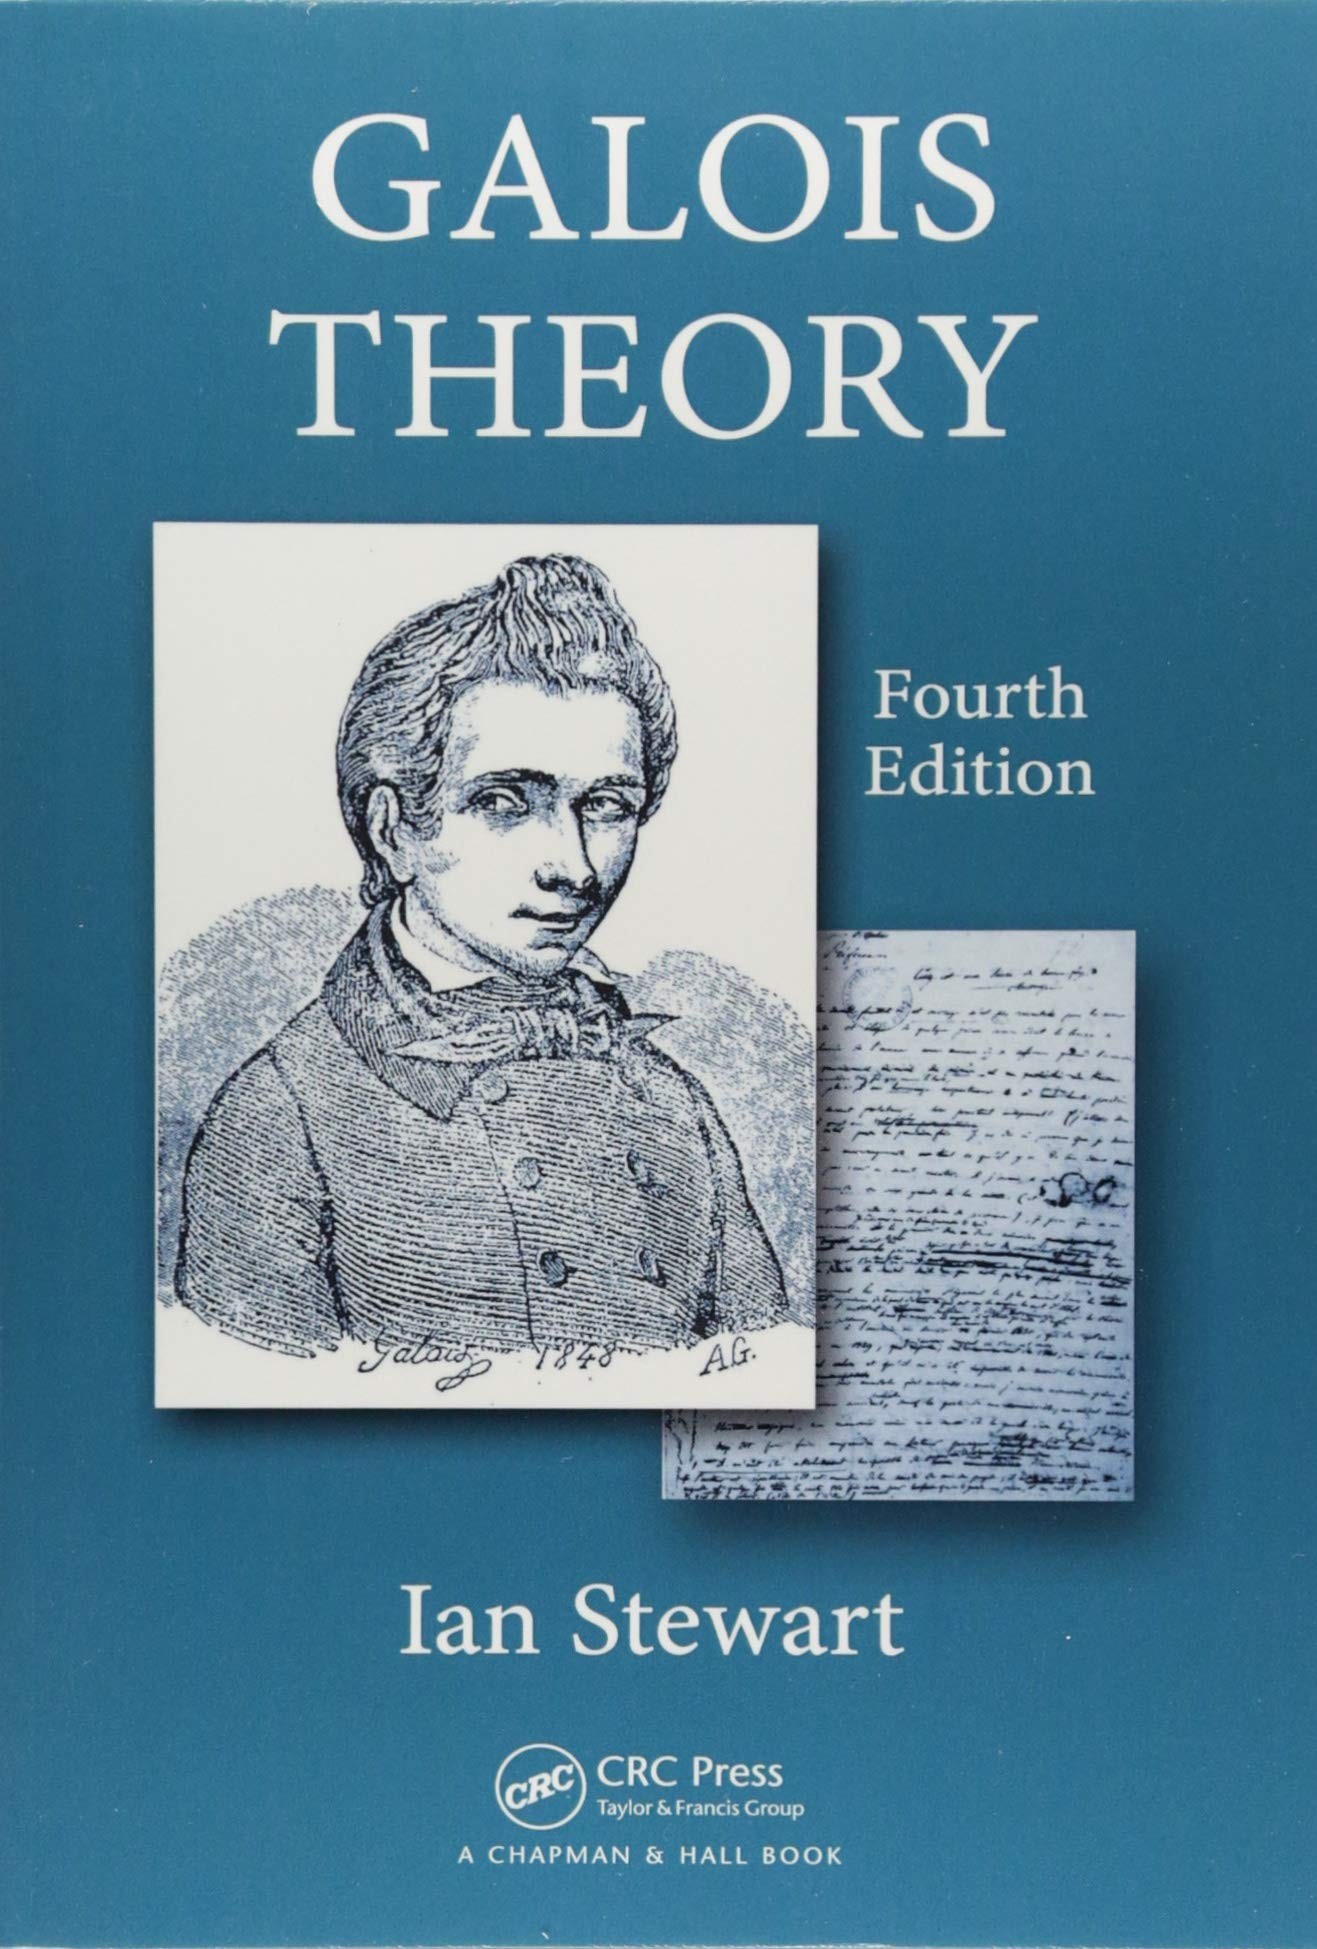 Galois Theory 4th Edition